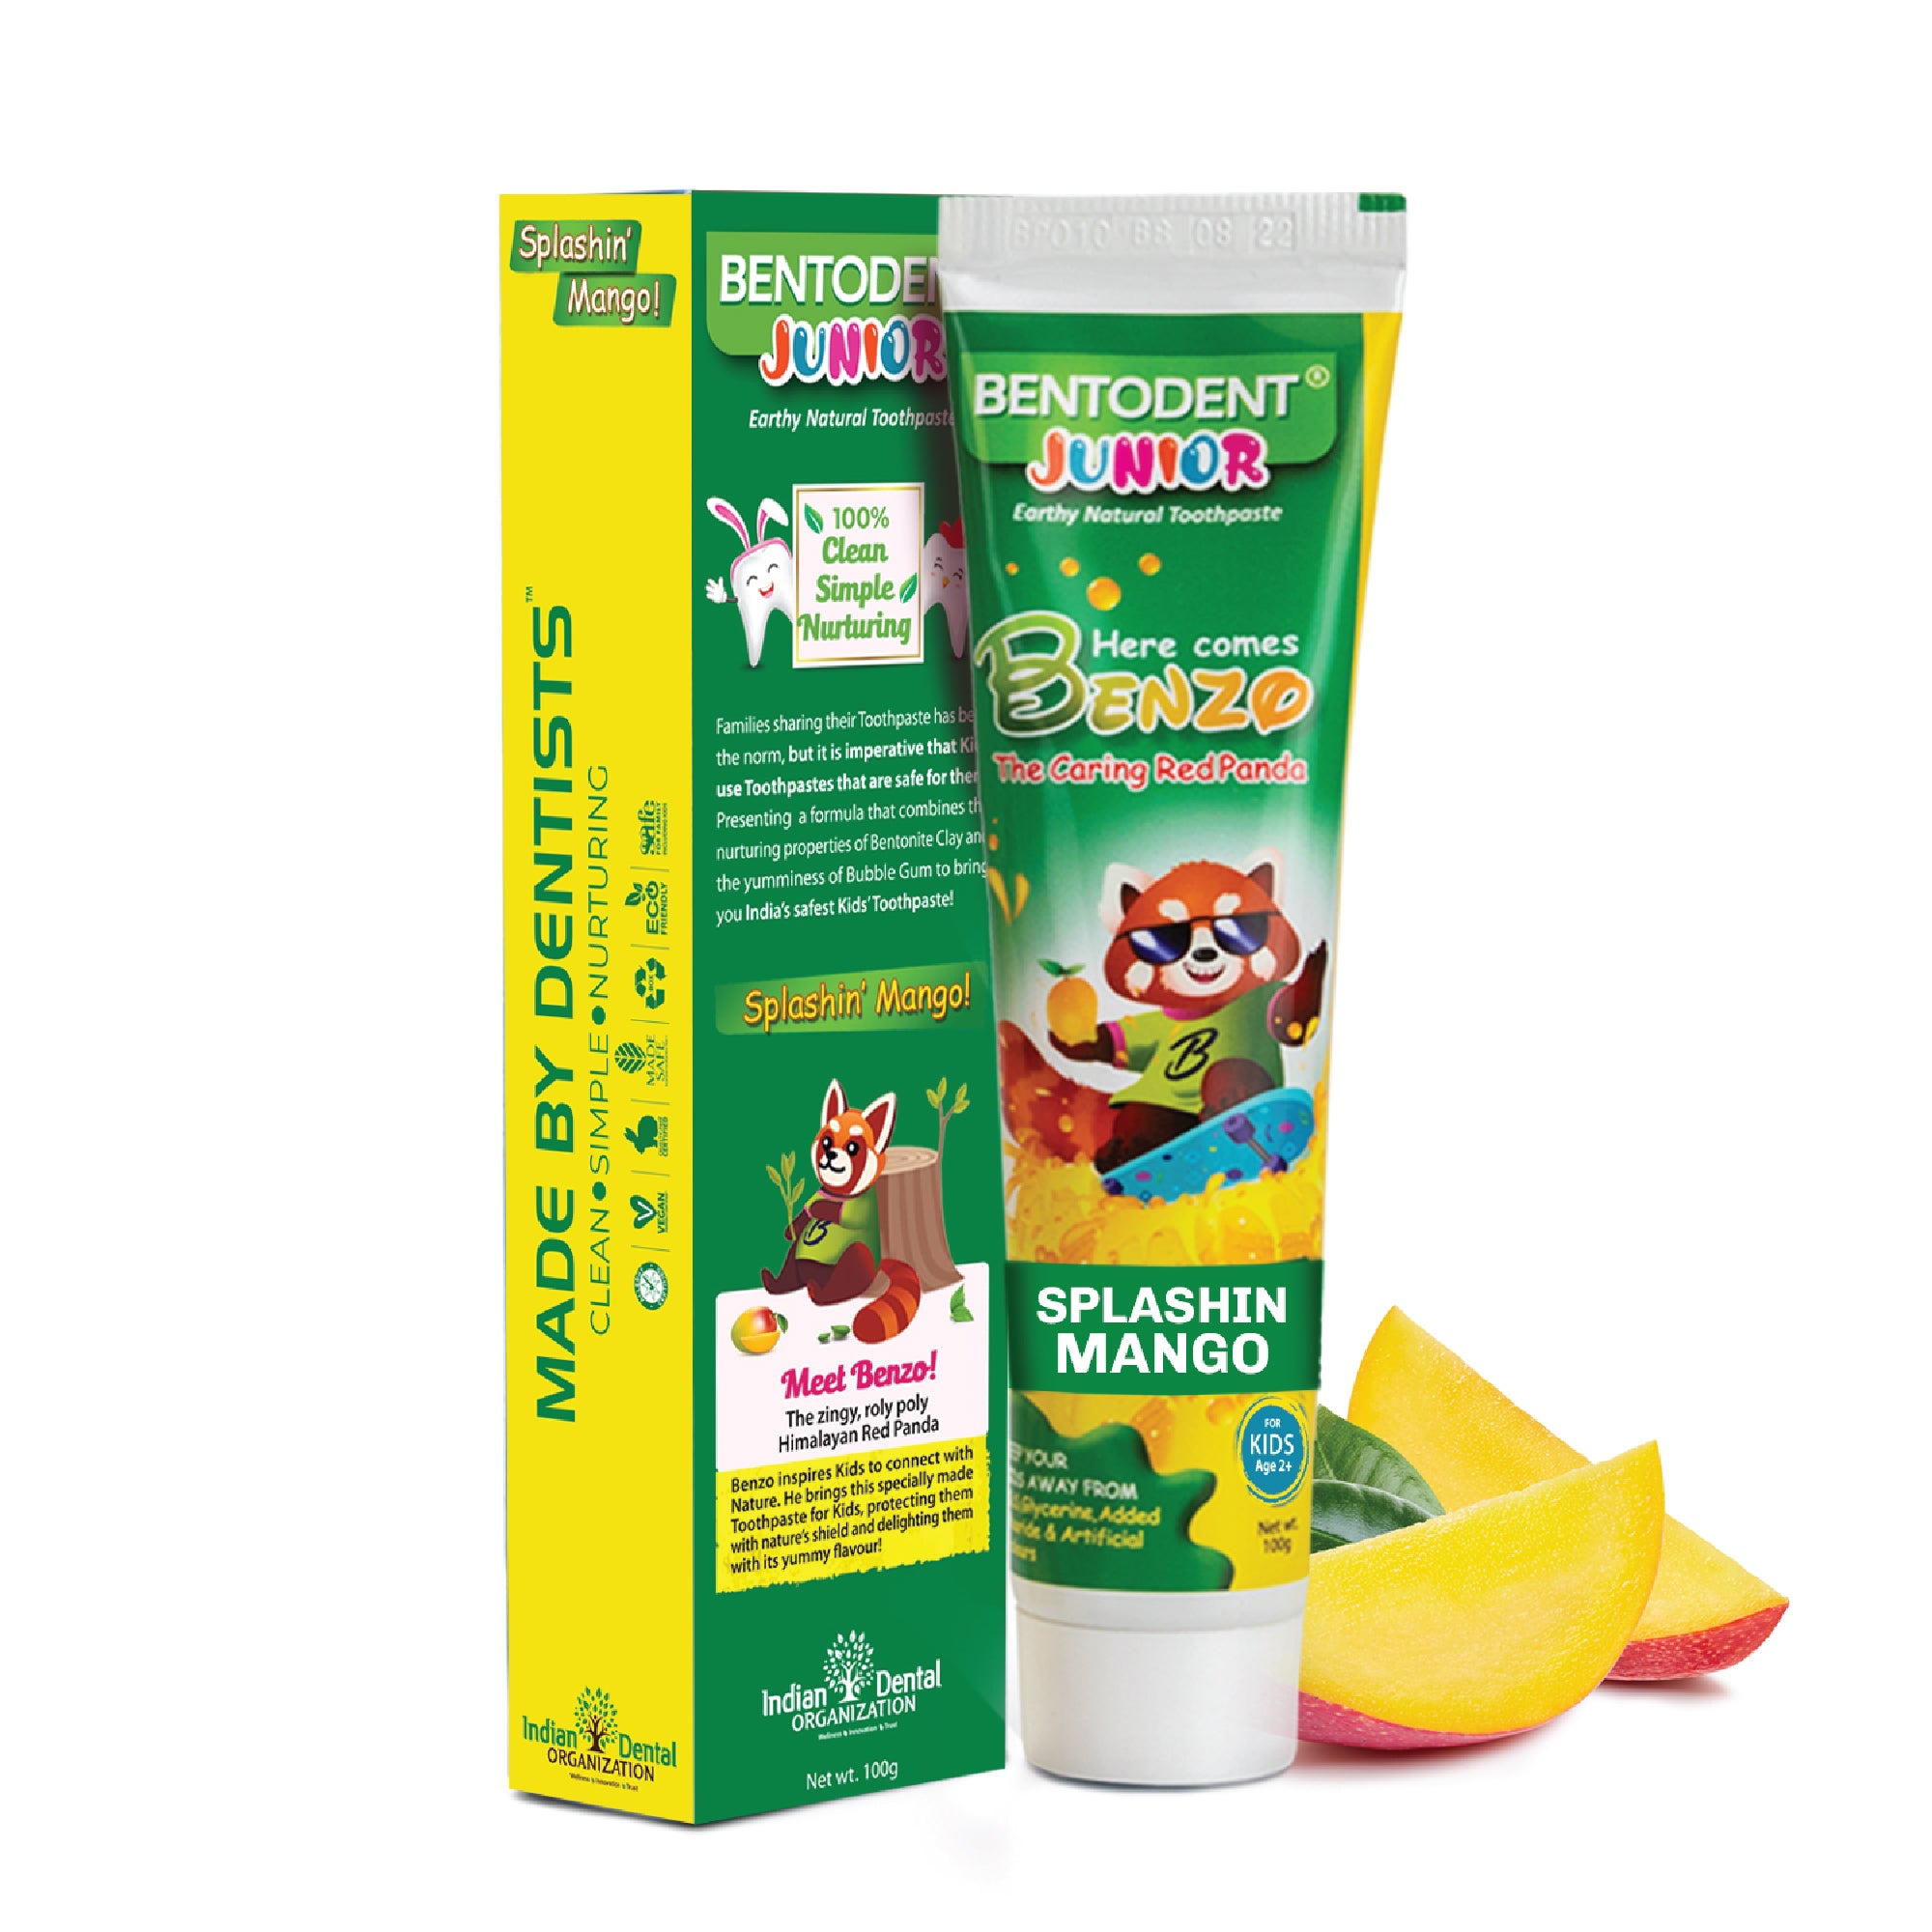 Bentodent 100% Natural Kids Splashin Mango Toothpaste, Fluoride Free,  Sls Free, Complete oral care protection for kids, Fresh Breath, Best toothpaste for kids 2+ years 100g - Indian Dental Organization